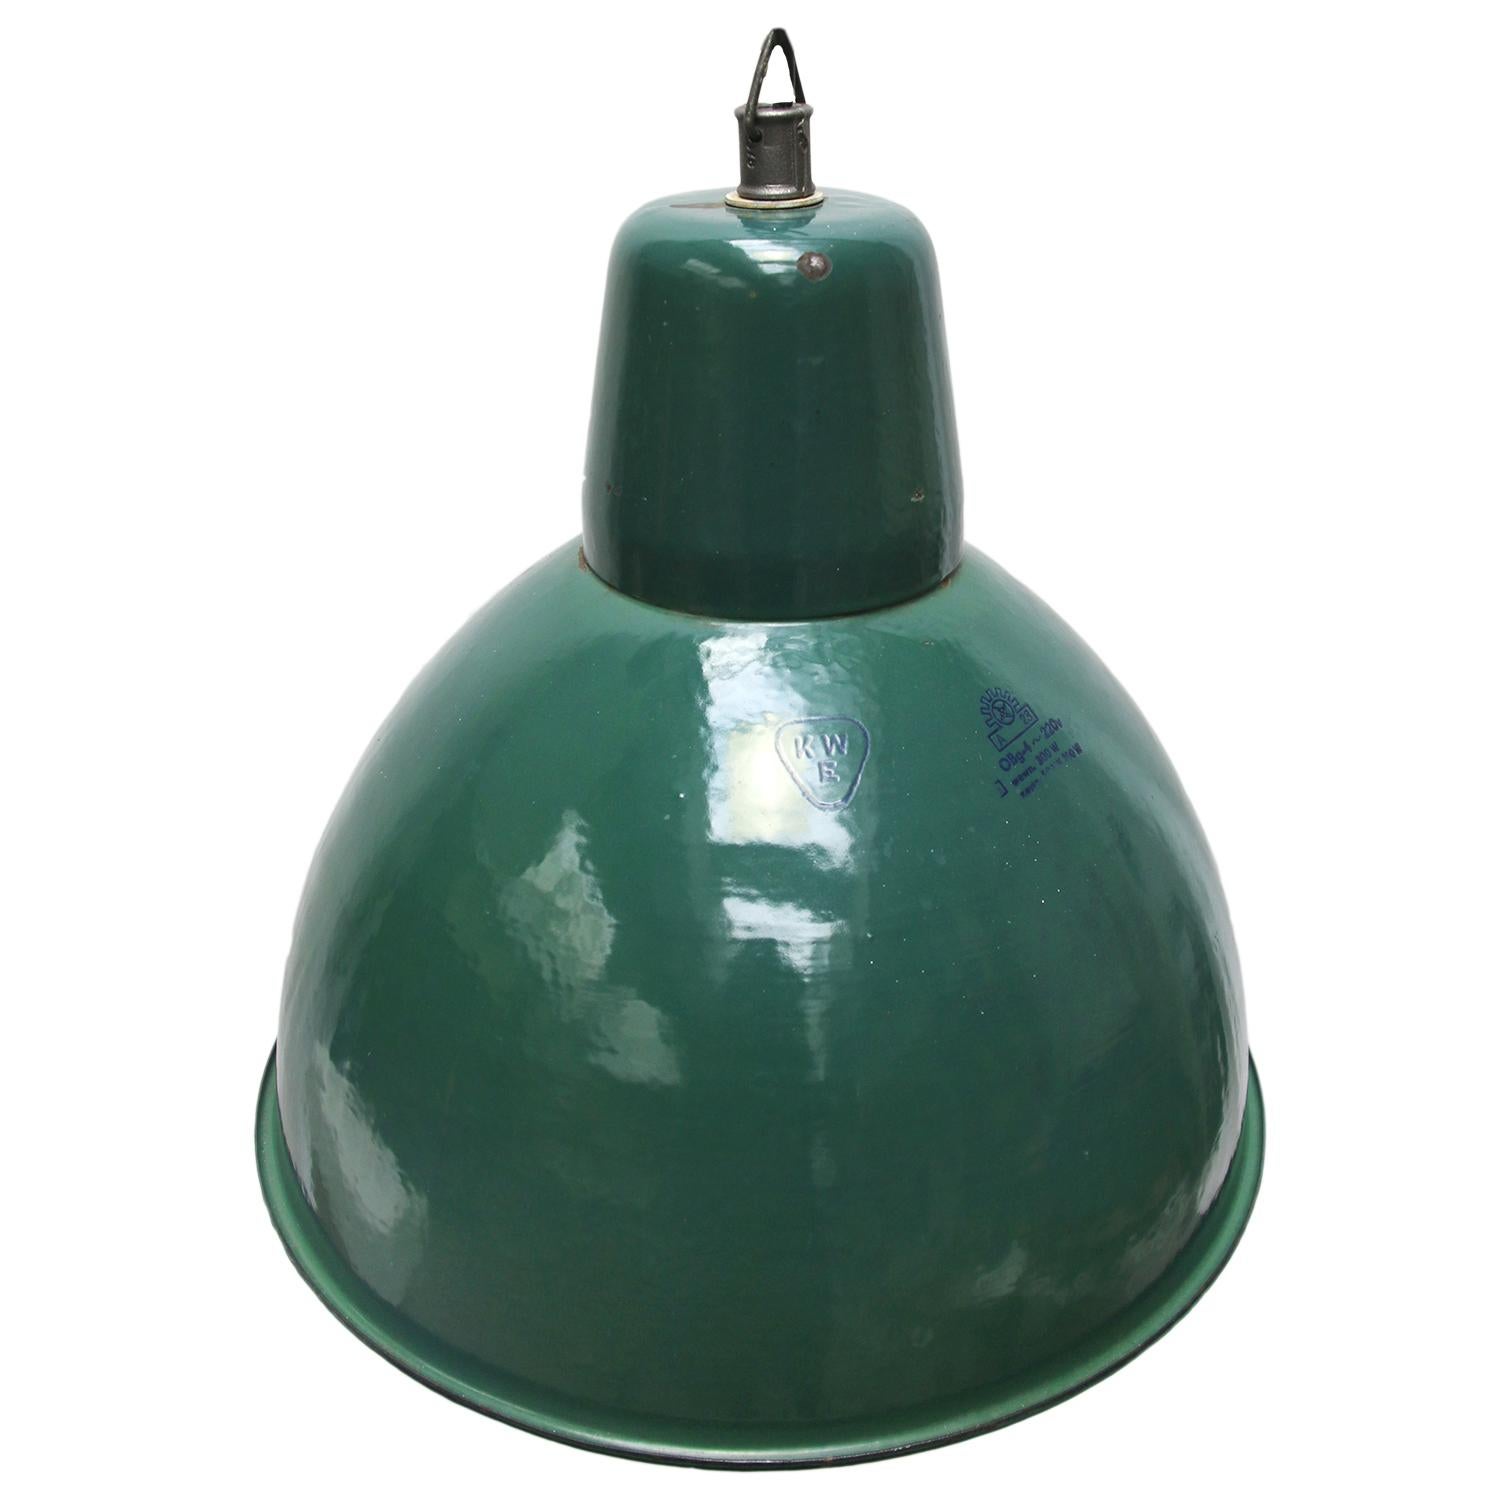 Industrial hanging light
petrol enamel white interior

Weight: 2.80 kg / 6.2 lb

Priced per individual item. All lamps have been made suitable by international standards for incandescent light bulbs, energy-efficient and LED bulbs. E26/E27 bulb